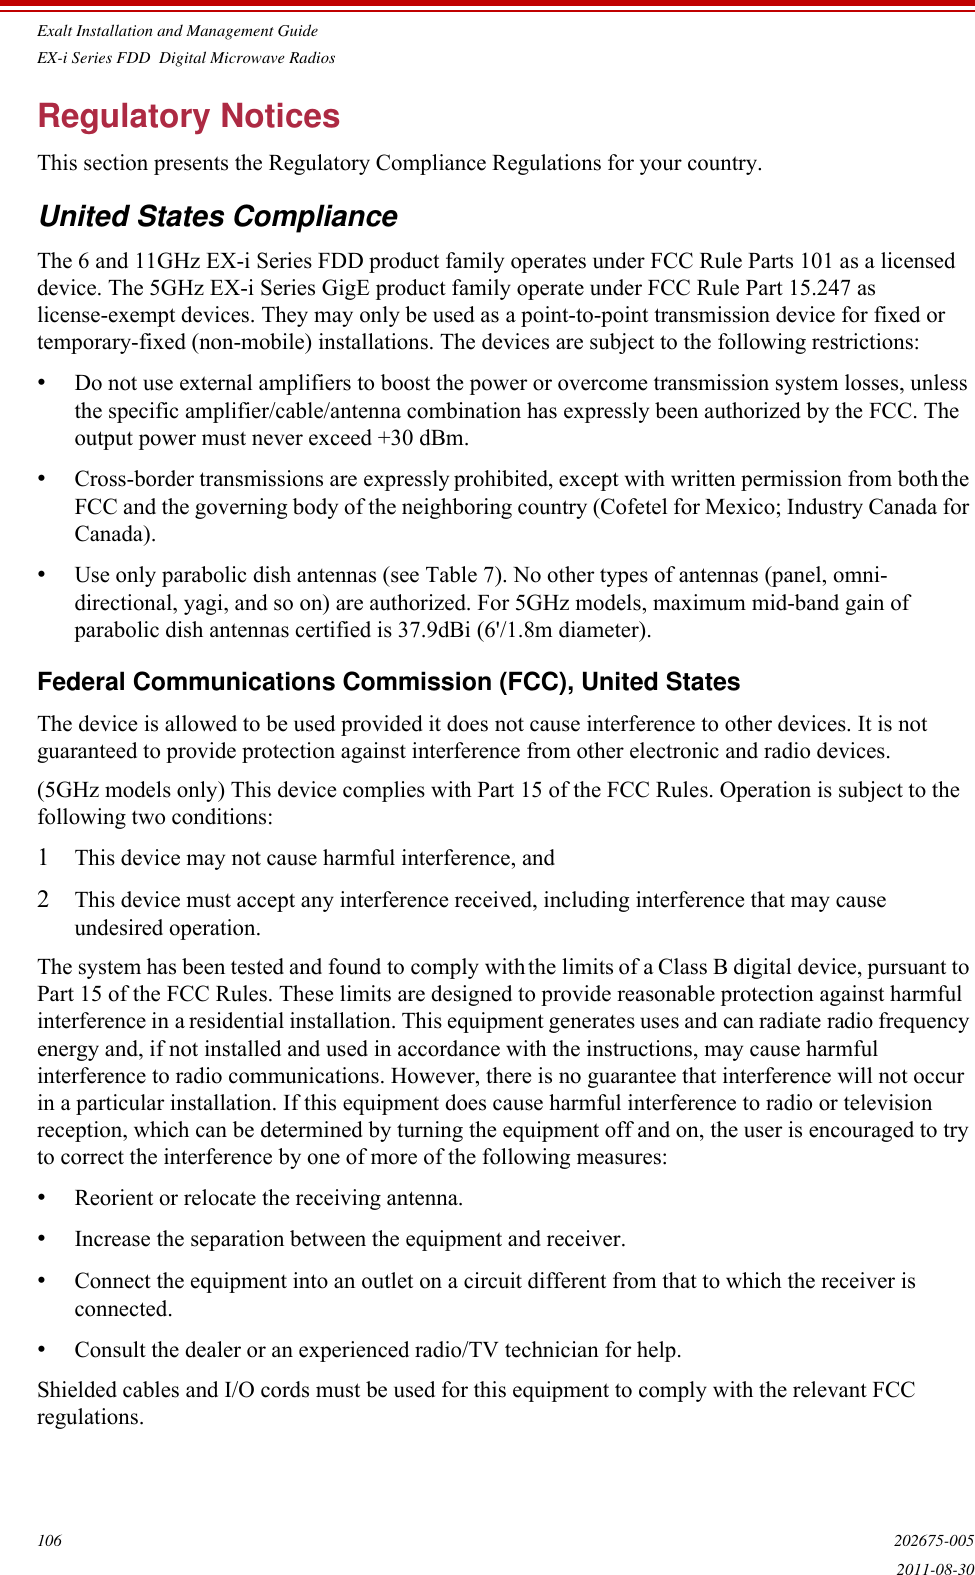 Exalt Installation and Management GuideEX-i Series FDD  Digital Microwave Radios106 202675-0052011-08-30Regulatory NoticesThis section presents the Regulatory Compliance Regulations for your country.United States ComplianceThe 6 and 11GHz EX-i Series FDD product family operates under FCC Rule Parts 101 as a licensed device. The 5GHz EX-i Series GigE product family operate under FCC Rule Part 15.247 as license-exempt devices. They may only be used as a point-to-point transmission device for fixed or temporary-fixed (non-mobile) installations. The devices are subject to the following restrictions:•Do not use external amplifiers to boost the power or overcome transmission system losses, unless the specific amplifier/cable/antenna combination has expressly been authorized by the FCC. The output power must never exceed +30 dBm.•Cross-border transmissions are expressly prohibited, except with written permission from both the FCC and the governing body of the neighboring country (Cofetel for Mexico; Industry Canada for Canada).•Use only parabolic dish antennas (see Table 7). No other types of antennas (panel, omni-directional, yagi, and so on) are authorized. For 5GHz models, maximum mid-band gain of parabolic dish antennas certified is 37.9dBi (6&apos;/1.8m diameter).Federal Communications Commission (FCC), United StatesThe device is allowed to be used provided it does not cause interference to other devices. It is not guaranteed to provide protection against interference from other electronic and radio devices.(5GHz models only) This device complies with Part 15 of the FCC Rules. Operation is subject to the following two conditions:1This device may not cause harmful interference, and 2This device must accept any interference received, including interference that may cause undesired operation.The system has been tested and found to comply with the limits of a Class B digital device, pursuant to Part 15 of the FCC Rules. These limits are designed to provide reasonable protection against harmful interference in a residential installation. This equipment generates uses and can radiate radio frequency energy and, if not installed and used in accordance with the instructions, may cause harmful interference to radio communications. However, there is no guarantee that interference will not occur in a particular installation. If this equipment does cause harmful interference to radio or television reception, which can be determined by turning the equipment off and on, the user is encouraged to try to correct the interference by one of more of the following measures:•Reorient or relocate the receiving antenna.•Increase the separation between the equipment and receiver.•Connect the equipment into an outlet on a circuit different from that to which the receiver is connected.•Consult the dealer or an experienced radio/TV technician for help.Shielded cables and I/O cords must be used for this equipment to comply with the relevant FCC regulations.